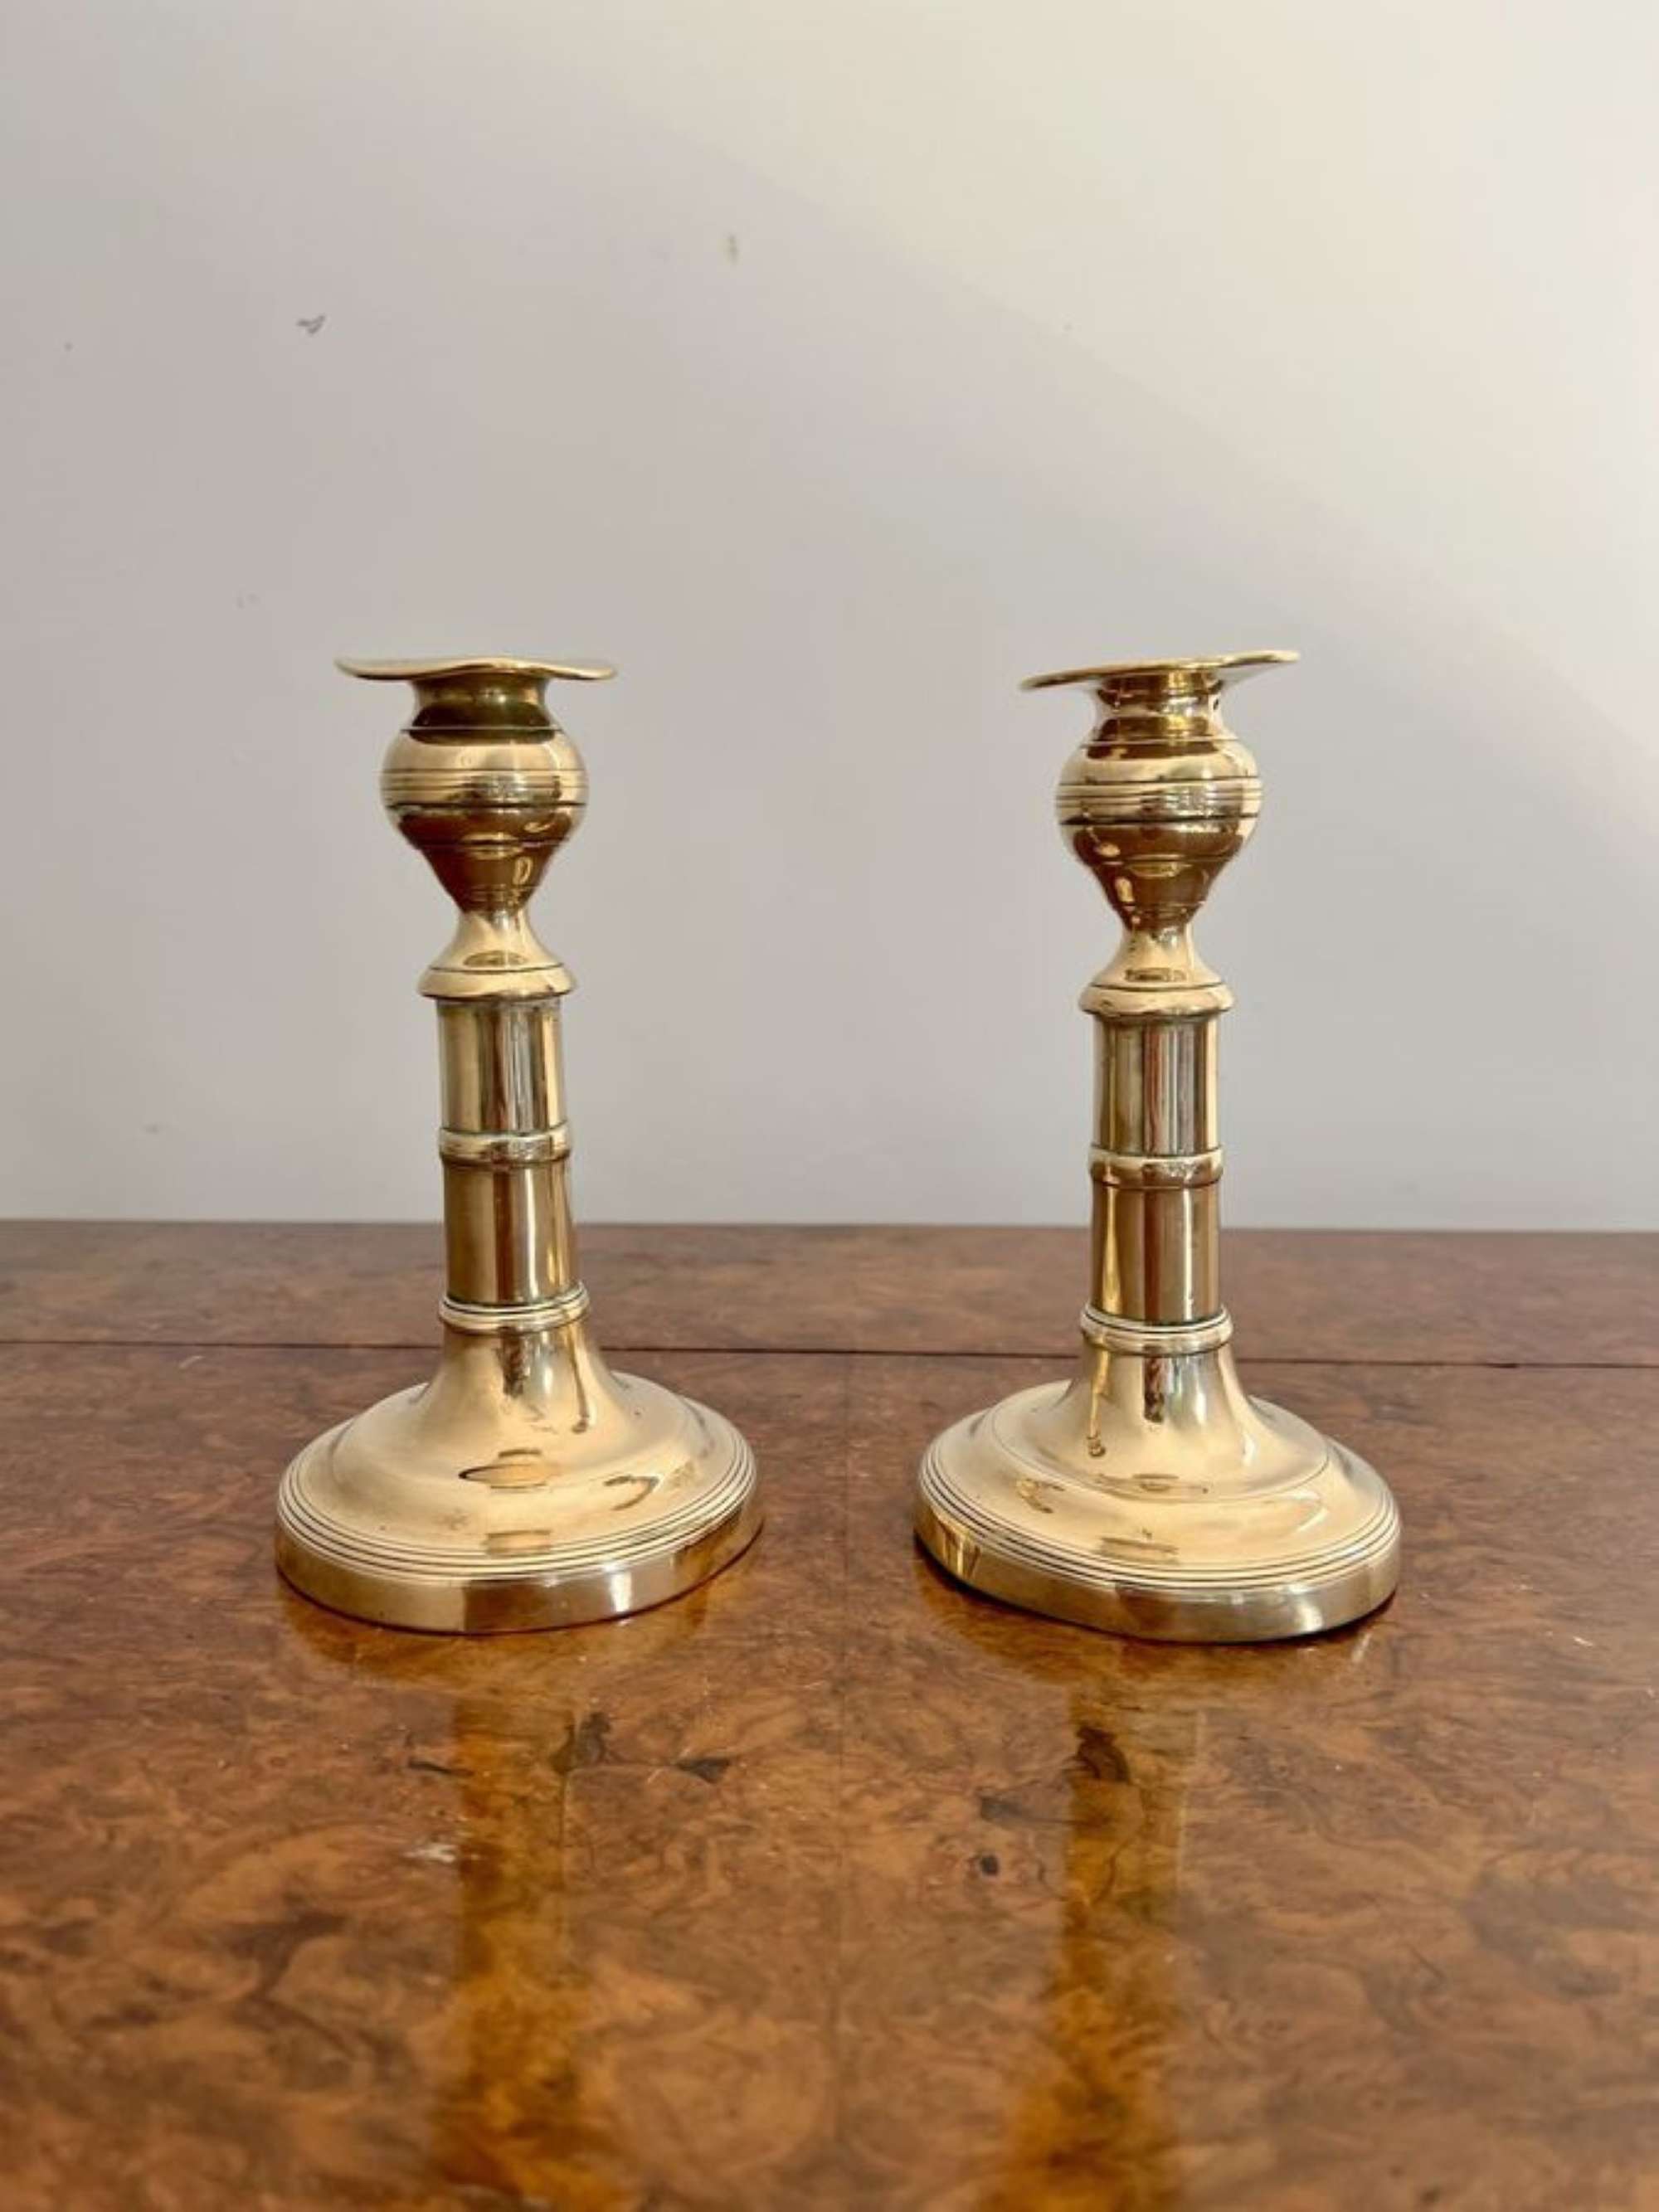 Pair of antique George III quality brass candlesticks